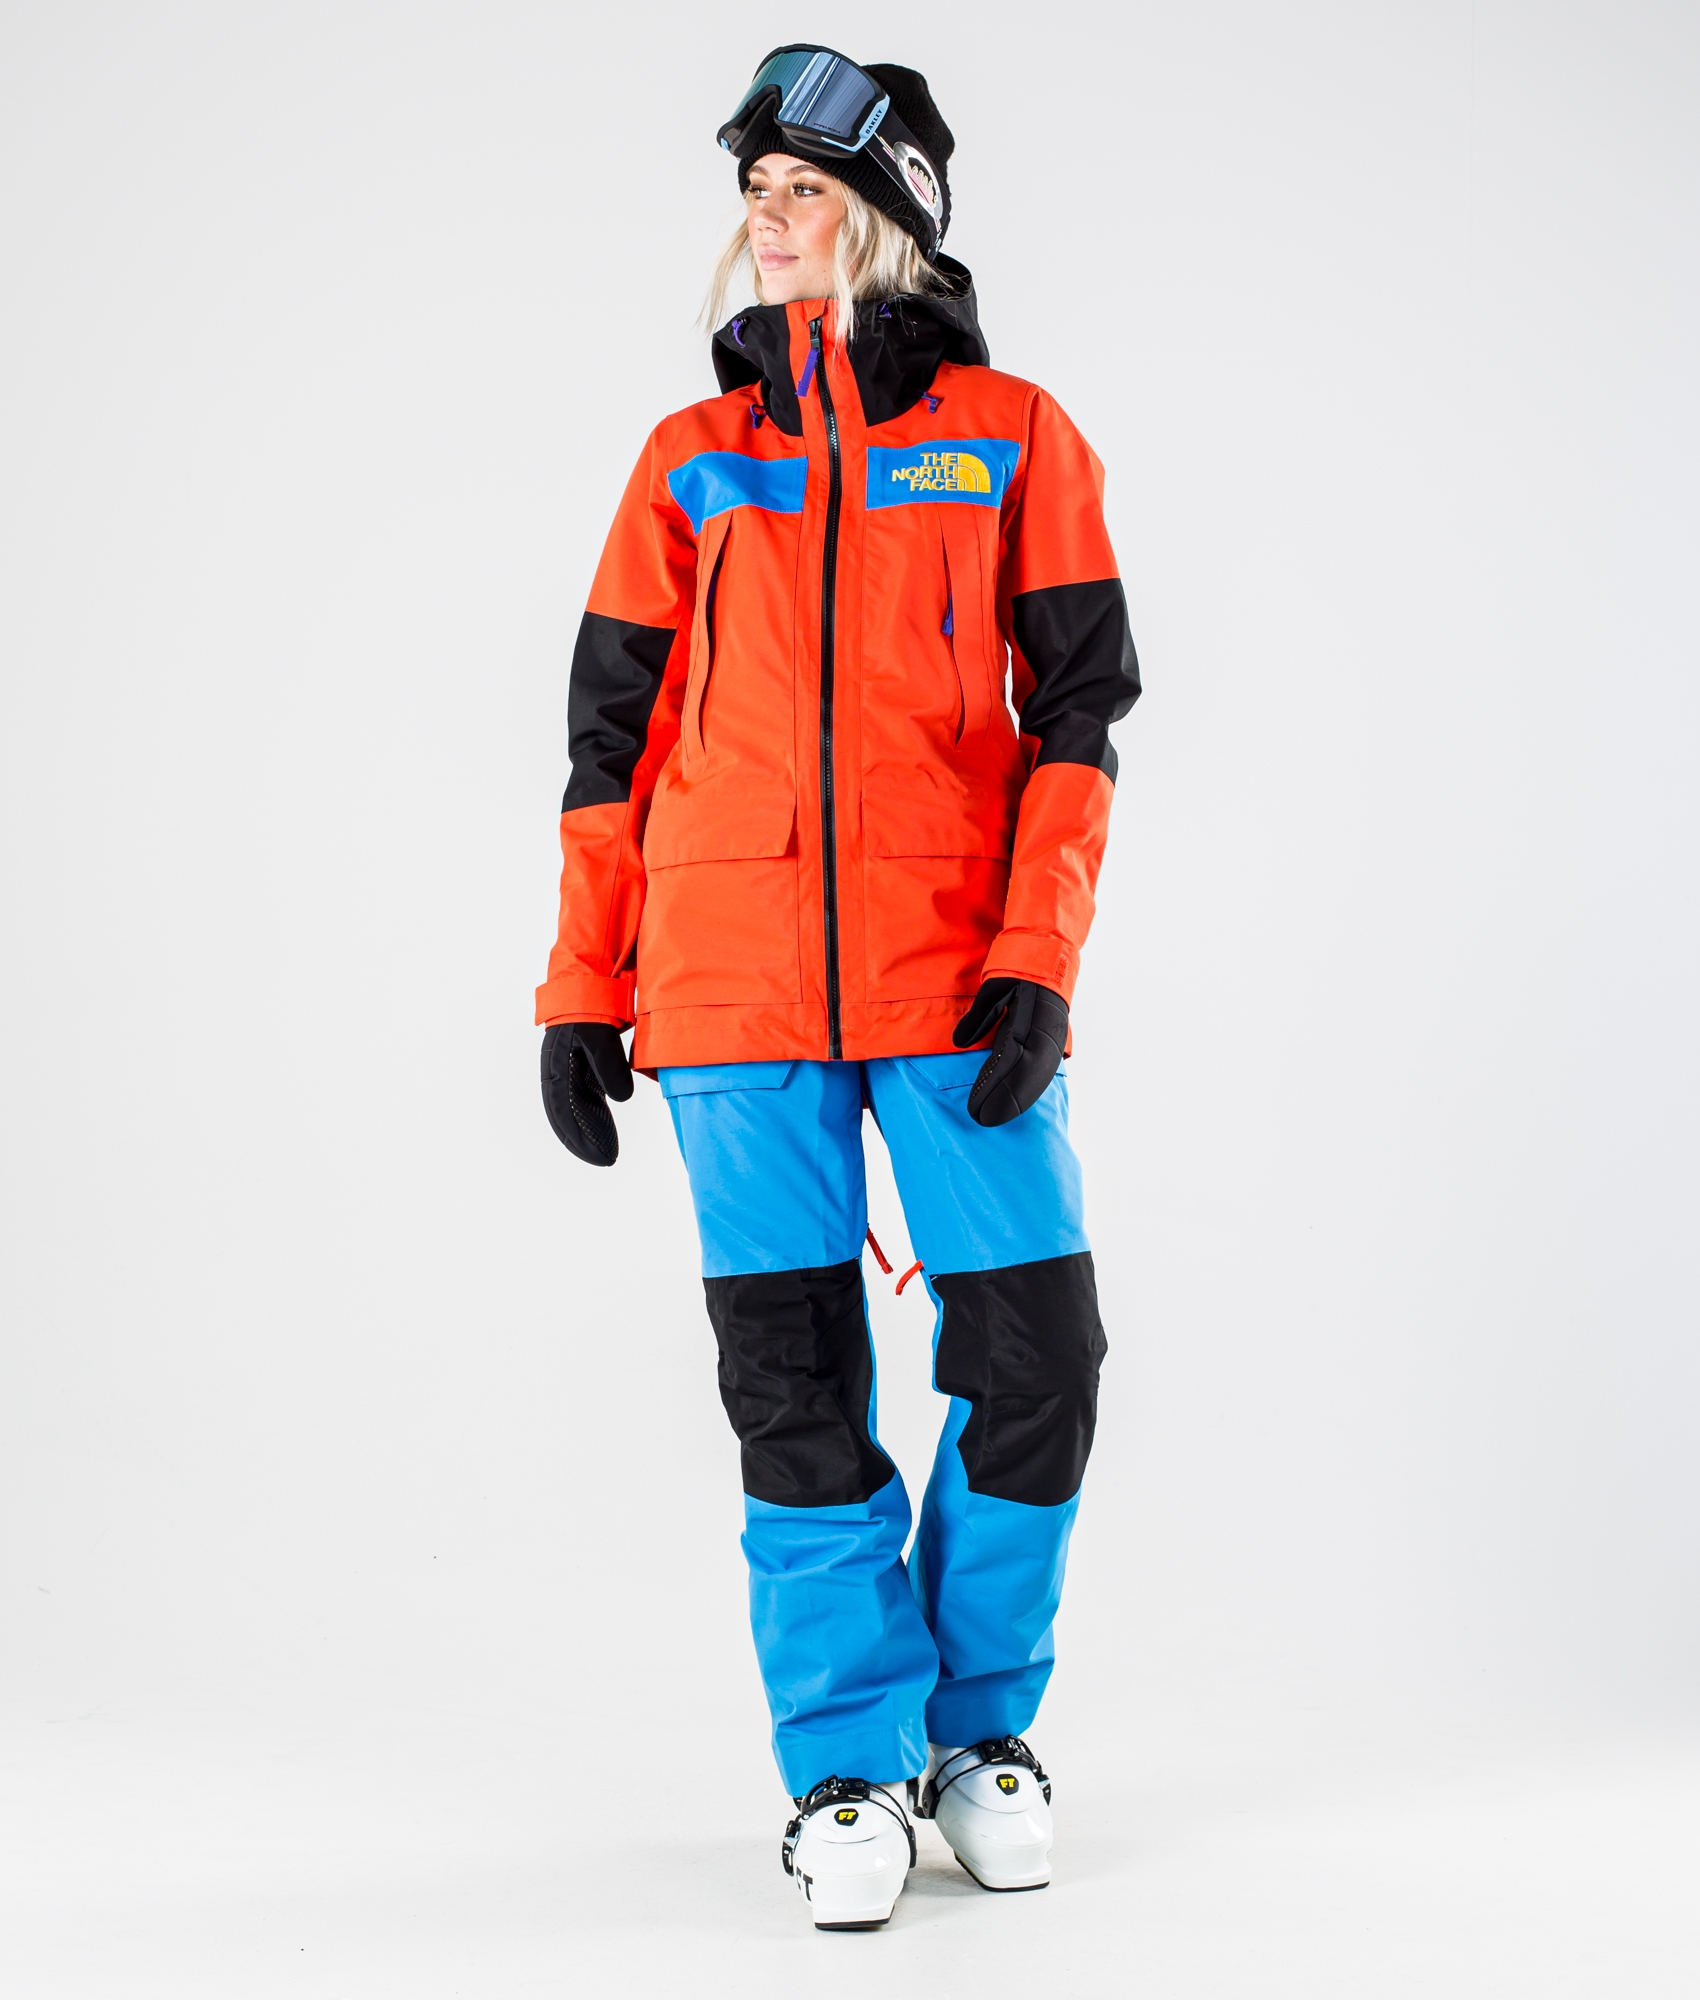 north face red womens ski jacket